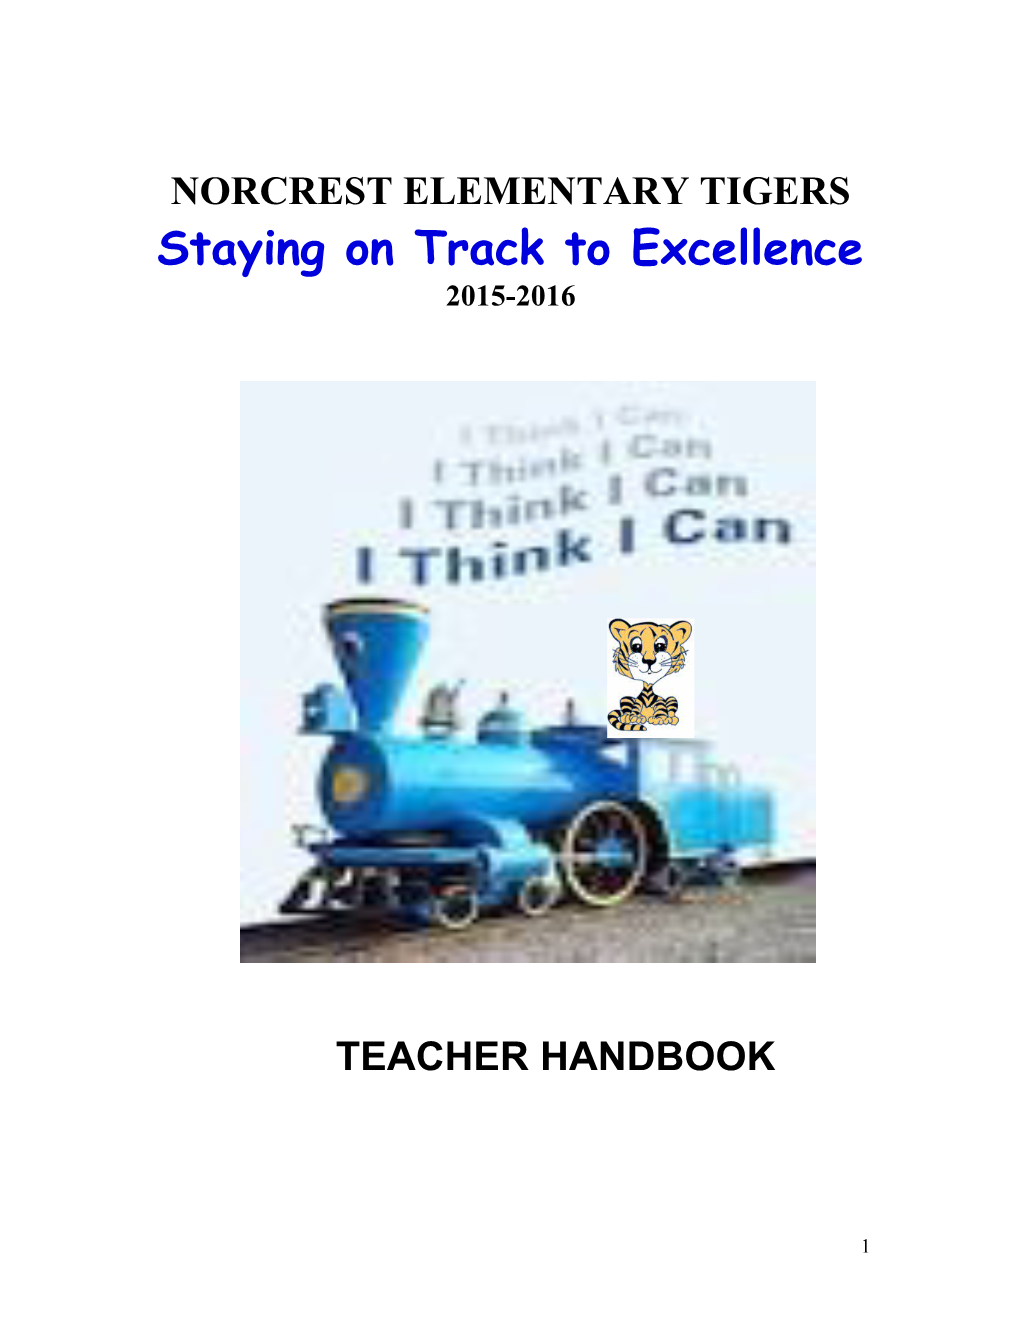 Norcrest Elementary Tigers